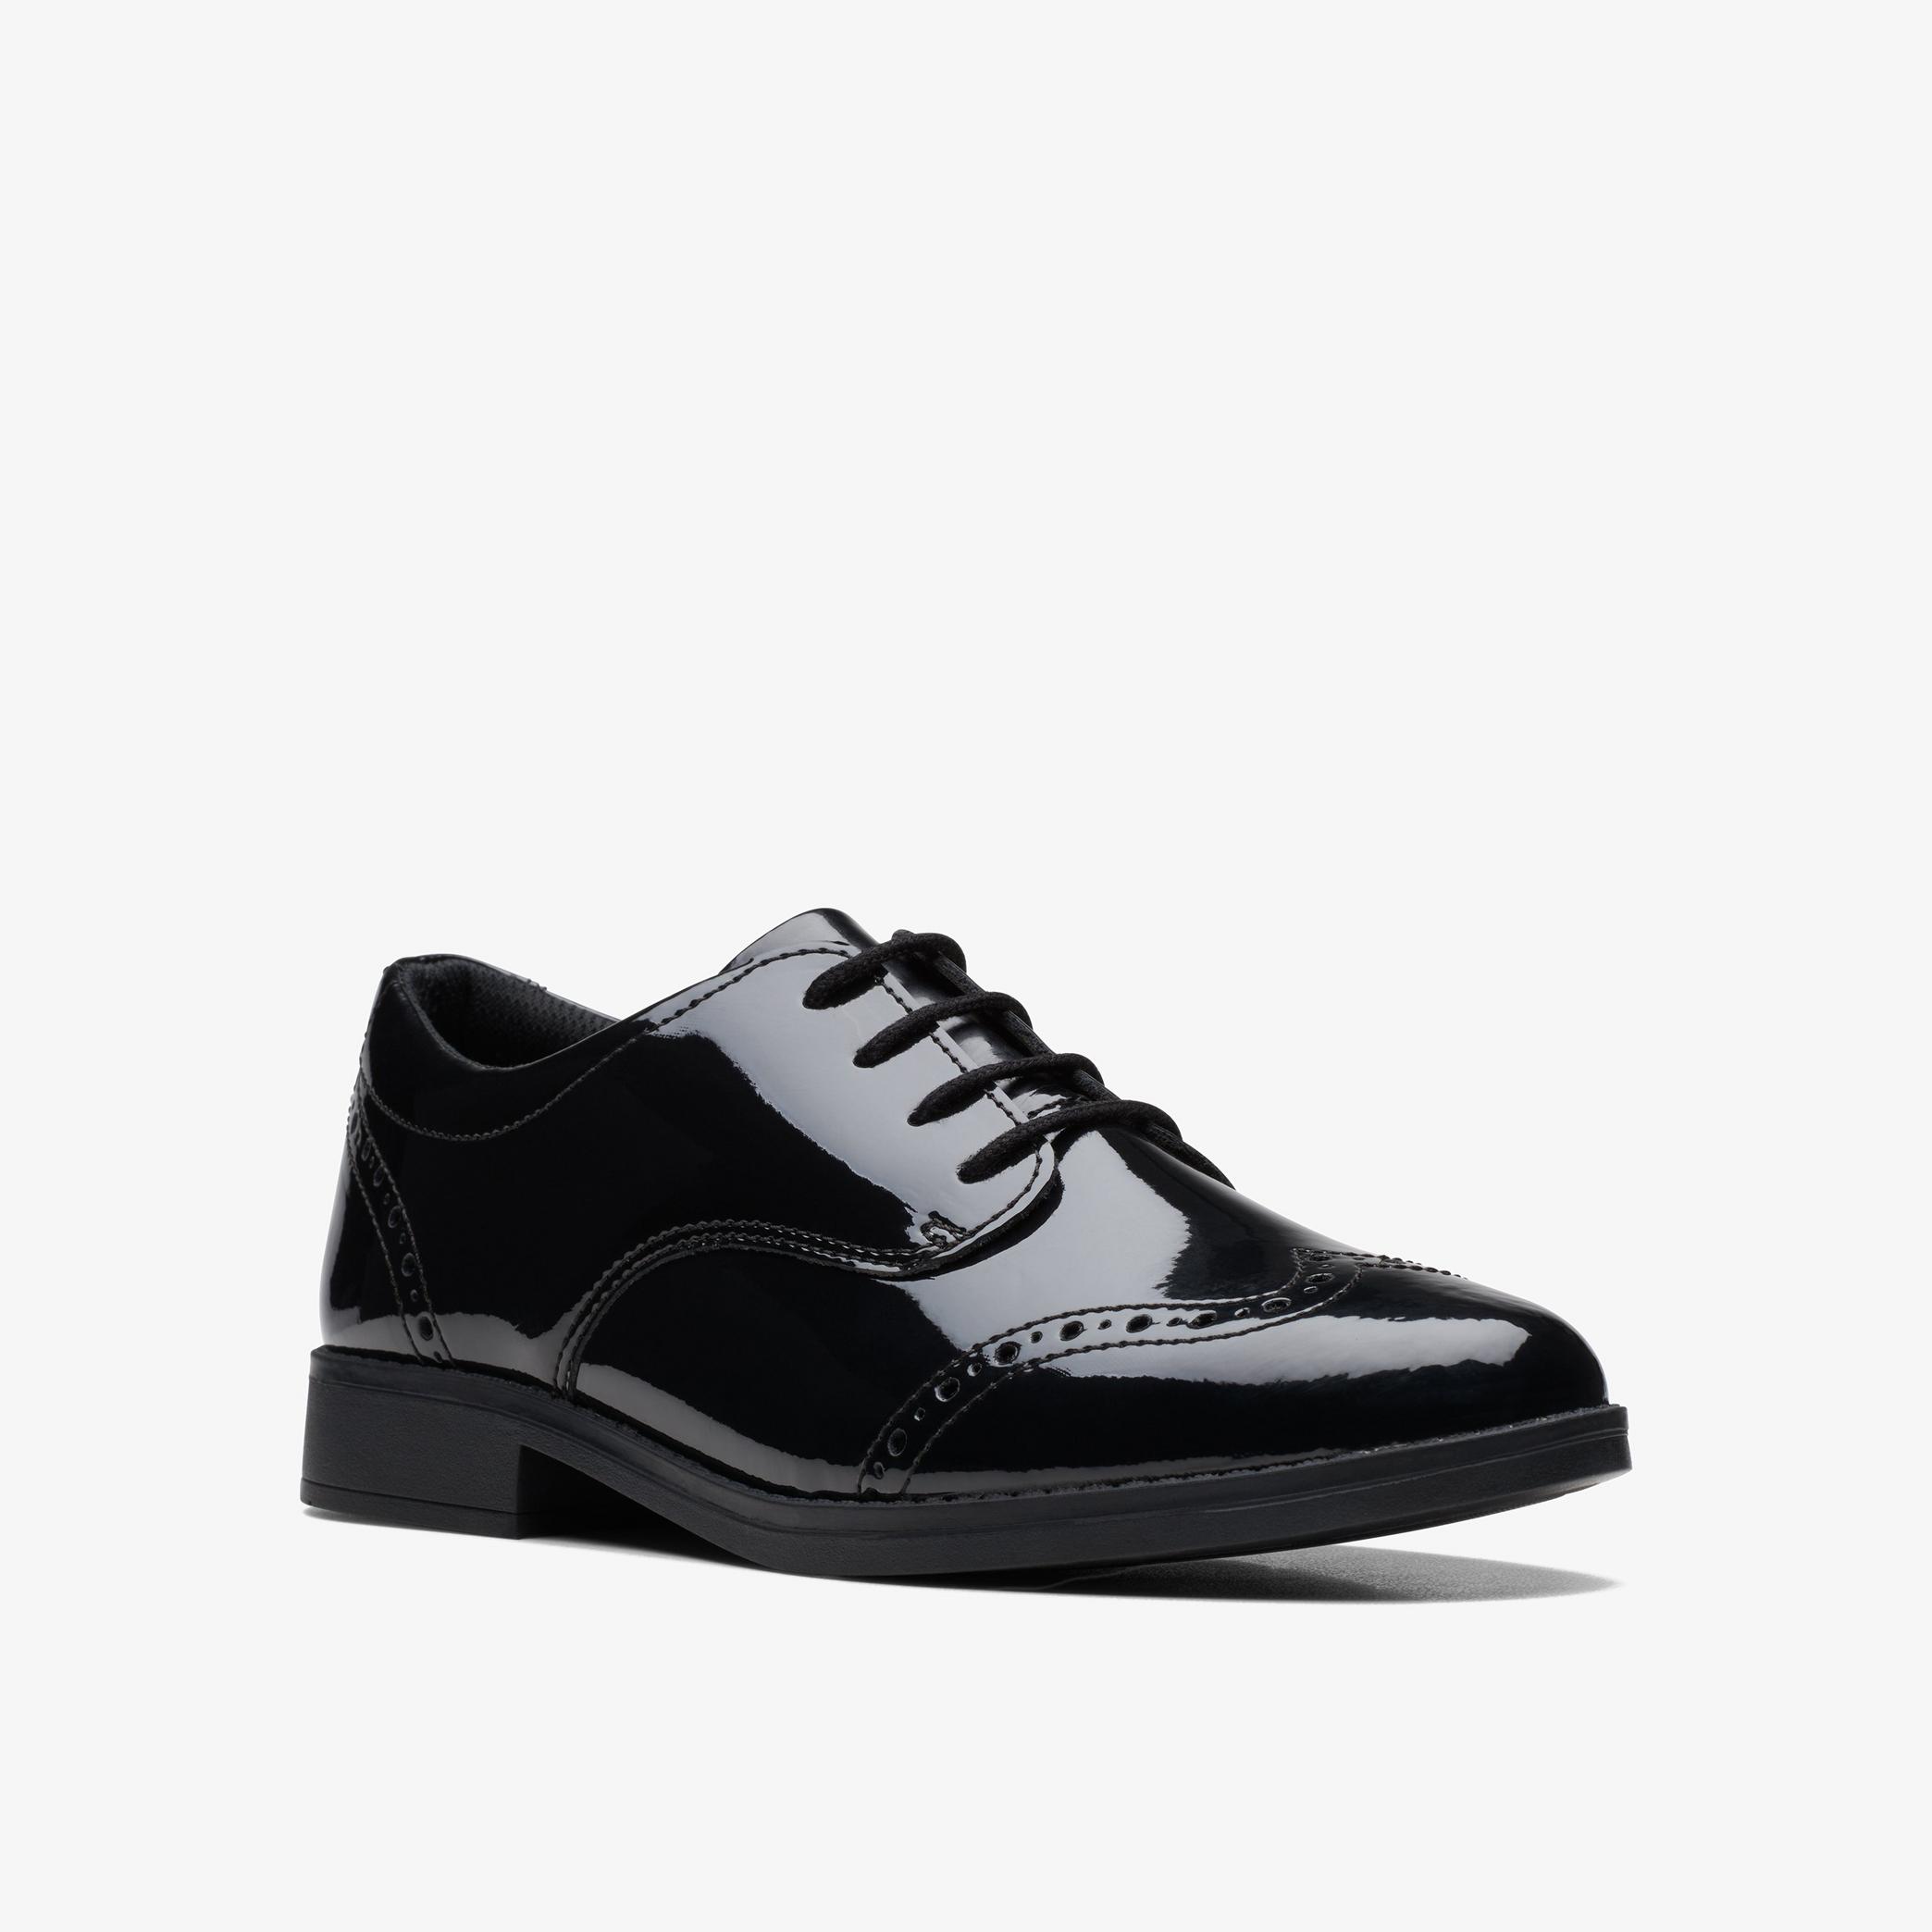 GIRLS Sami Walk Youth Black Patent Brogues | Clarks Outlet